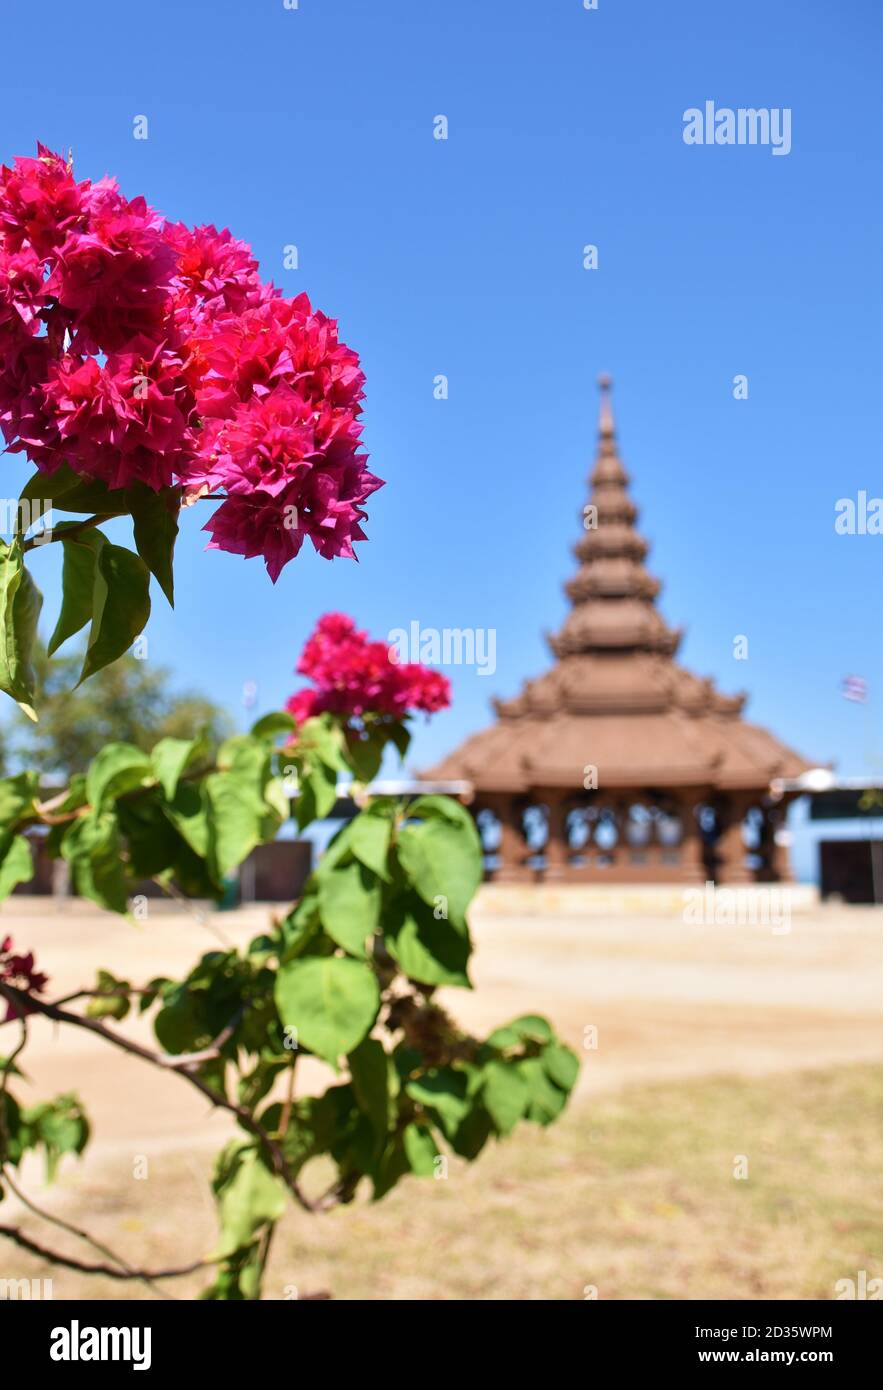 Flowers in front of a temple in Thailand Sanctuary of Truth Pattaya Stock Photo